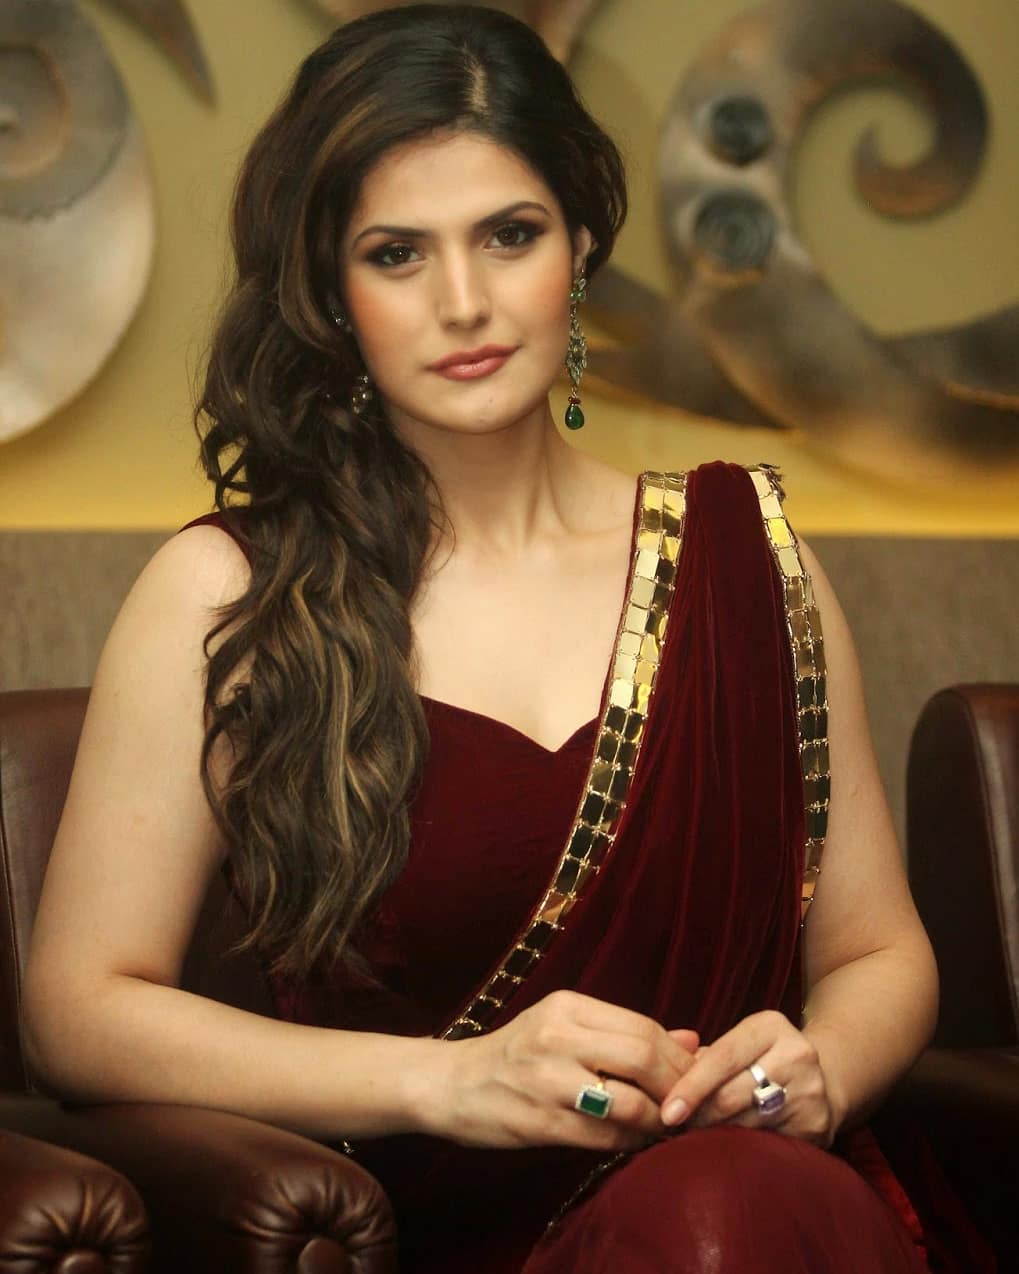 Zarine Khan Show Casing Her Most Amazing Curves In Maroon Revealing Saree